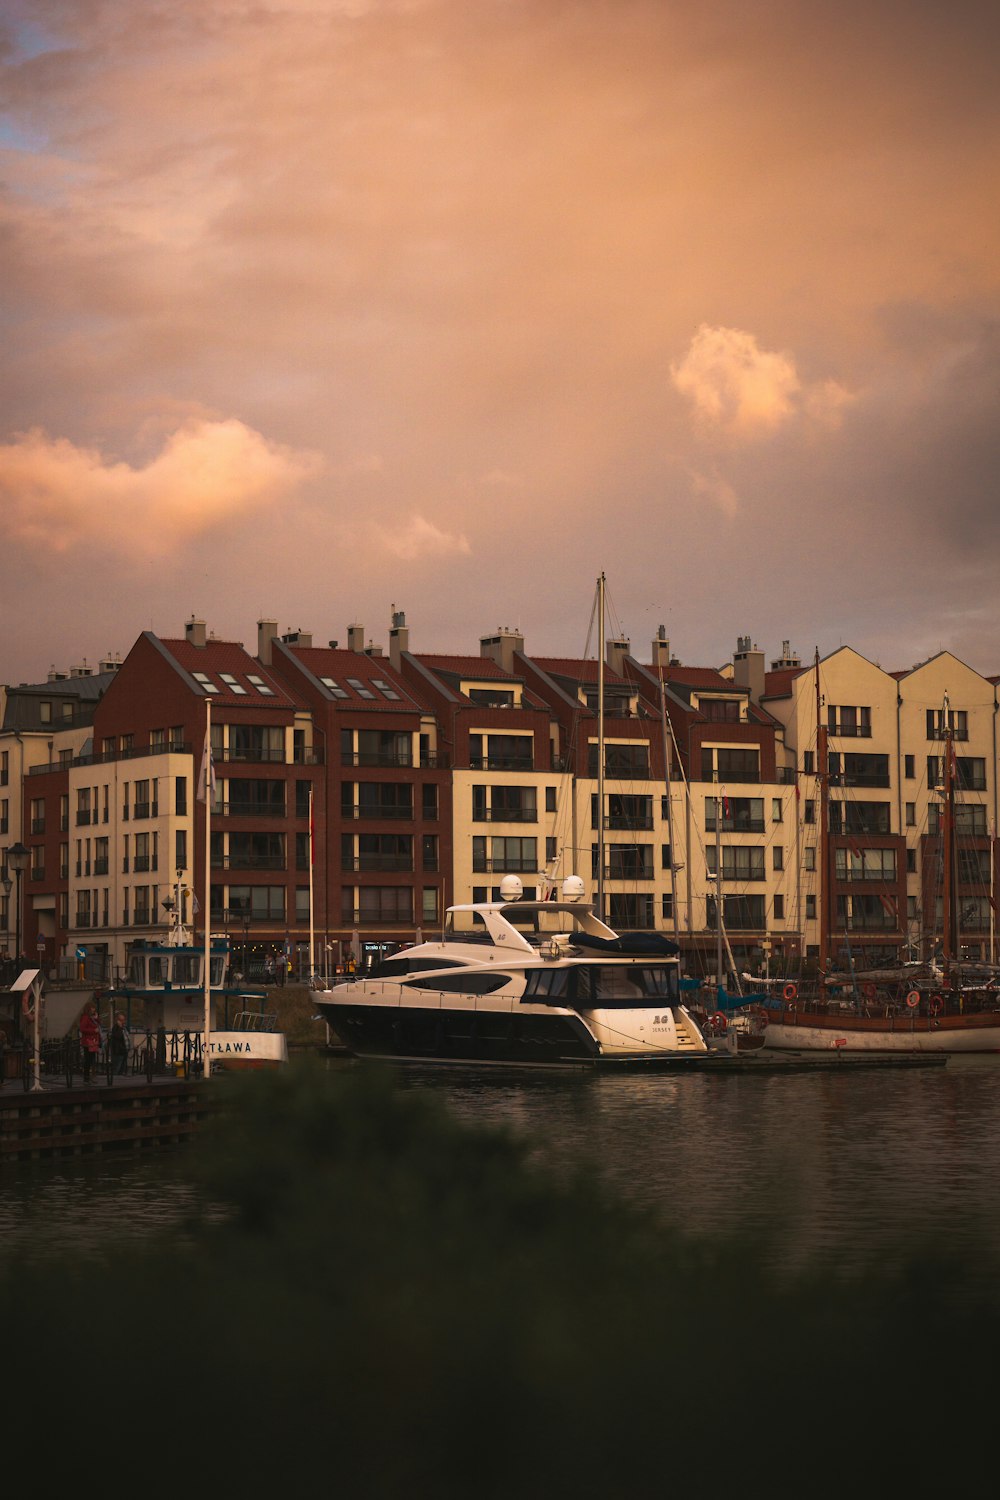 a boat is docked in front of a row of buildings